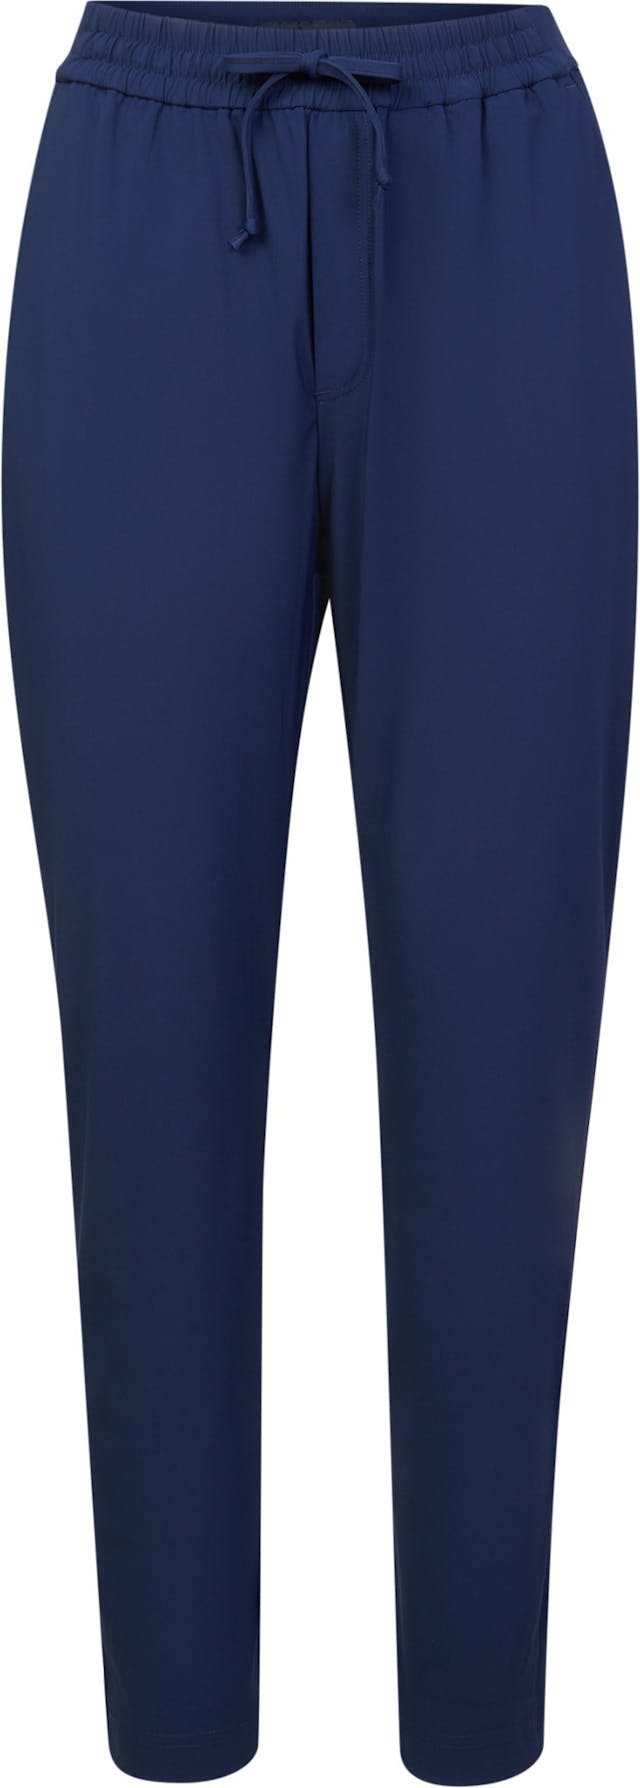 Product image for Any Jersey Pants - Women's